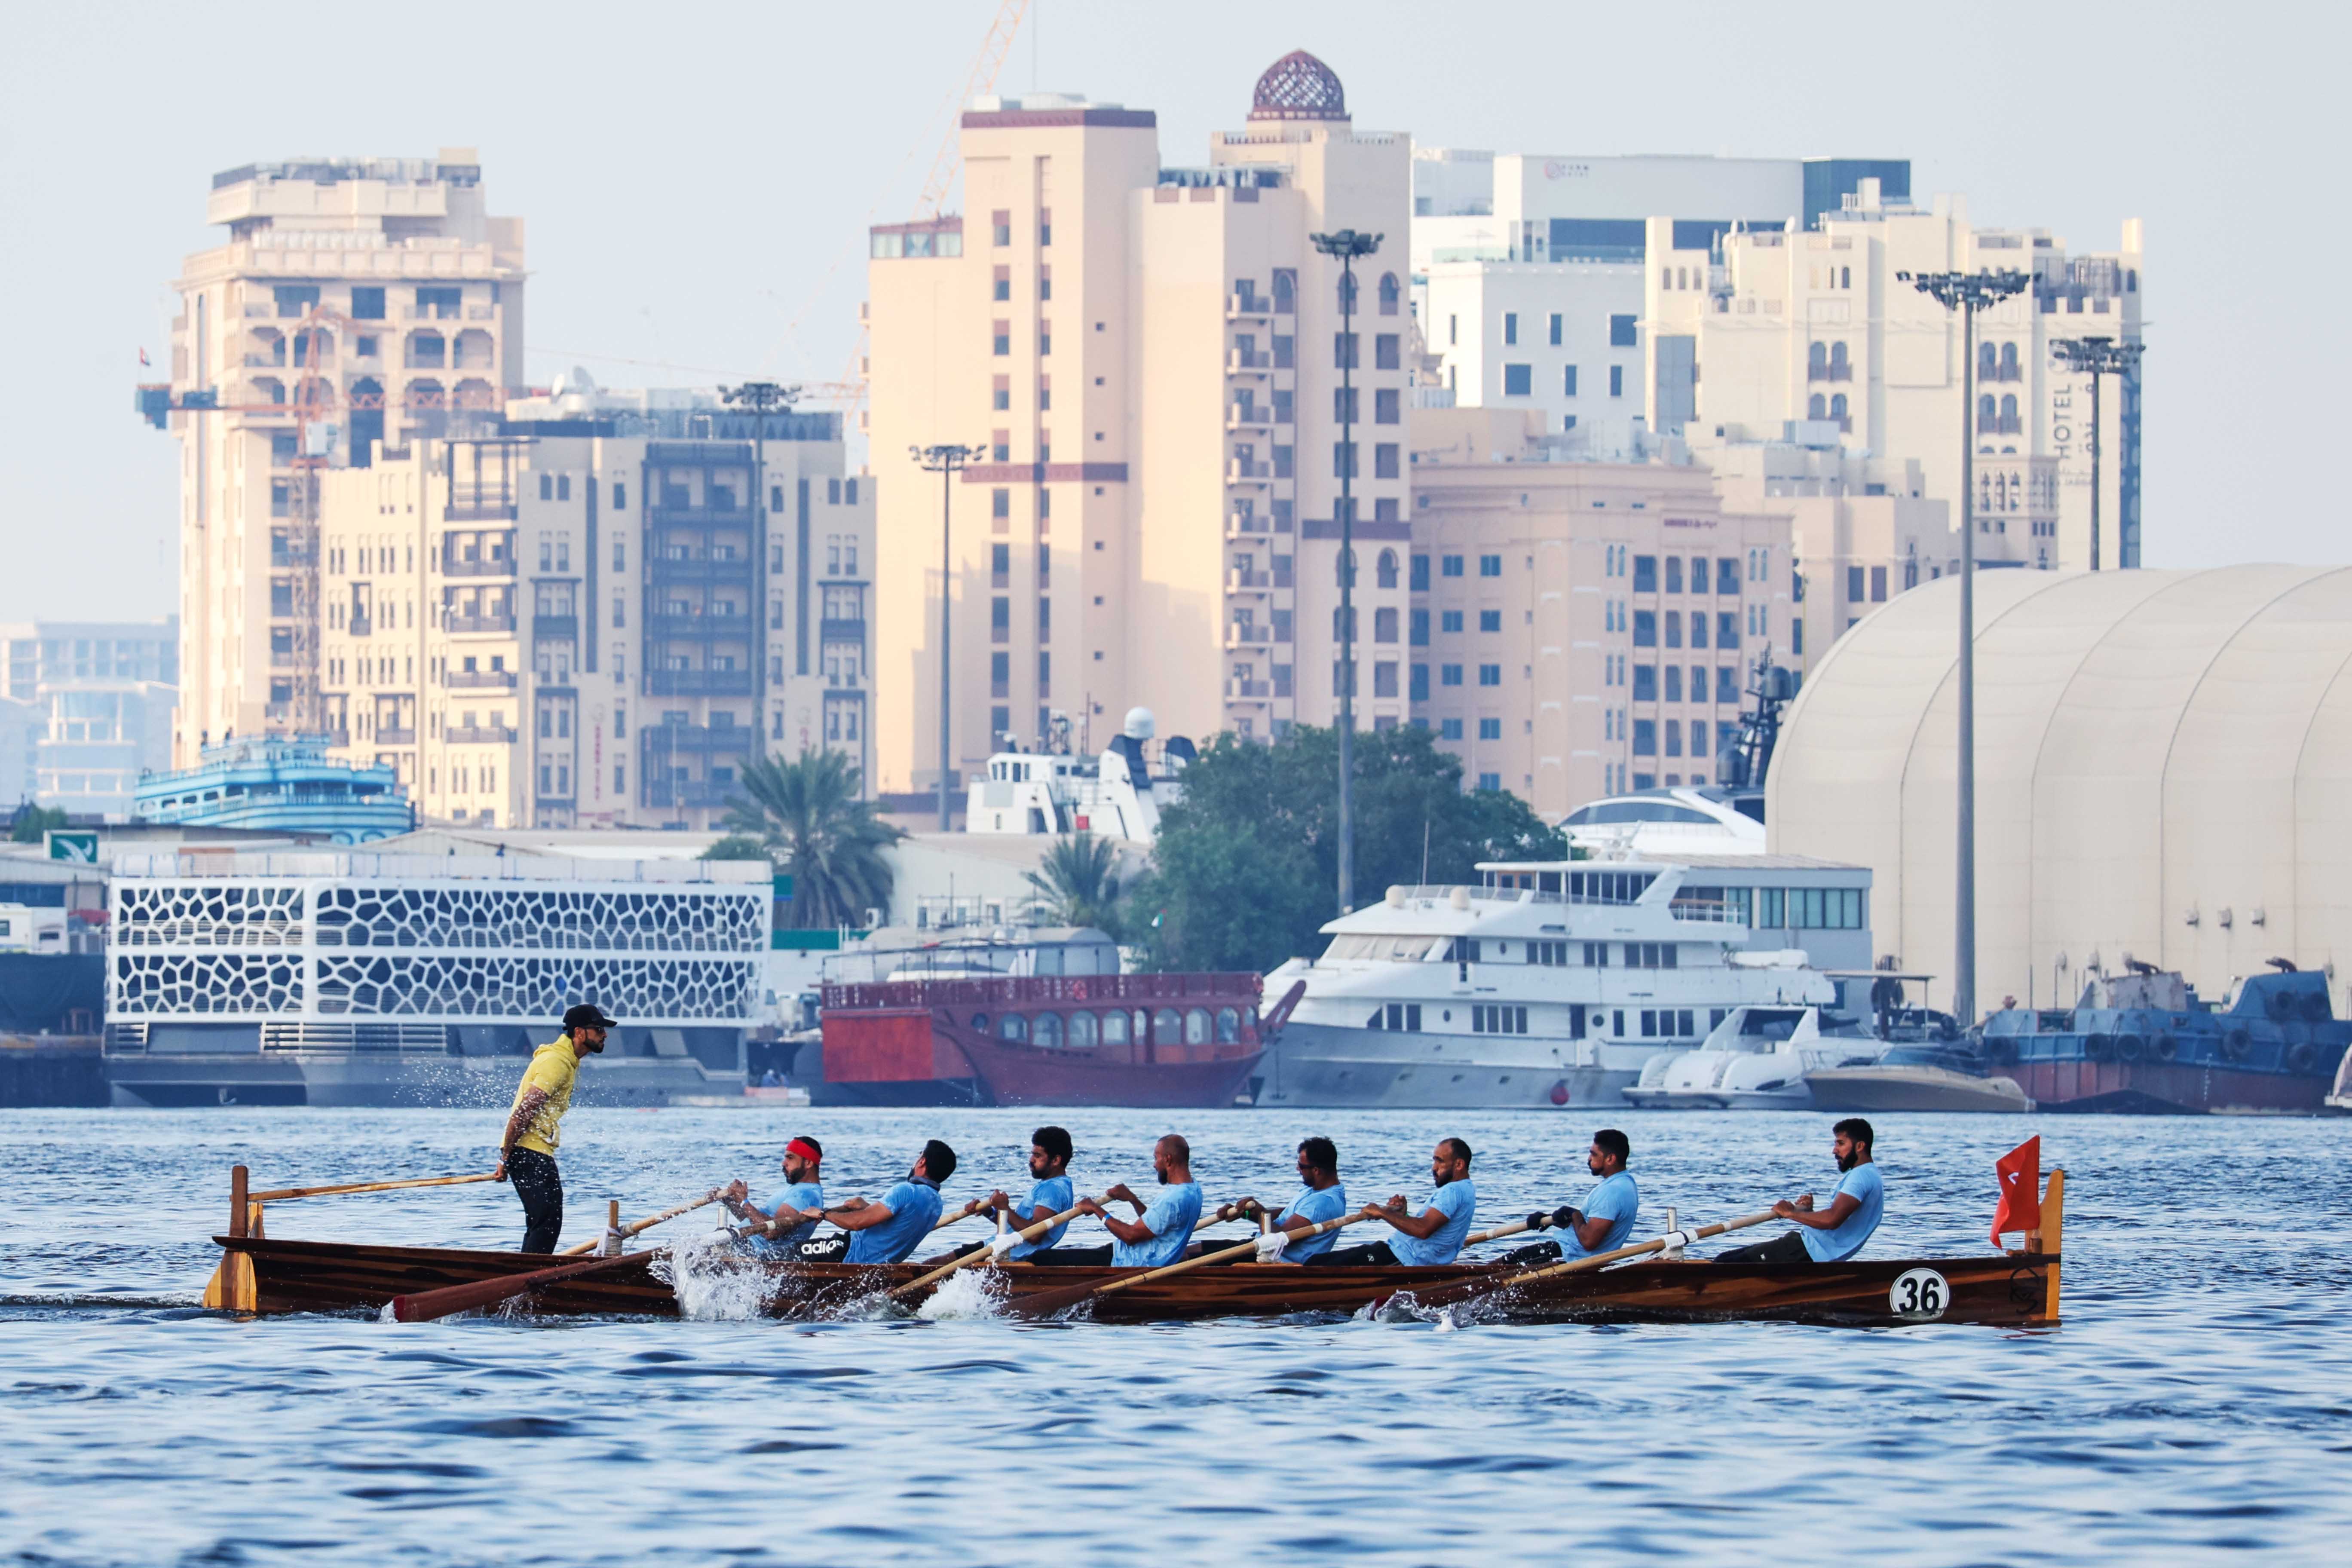 Second Round of the Dubai Traditional Rowing Race Today